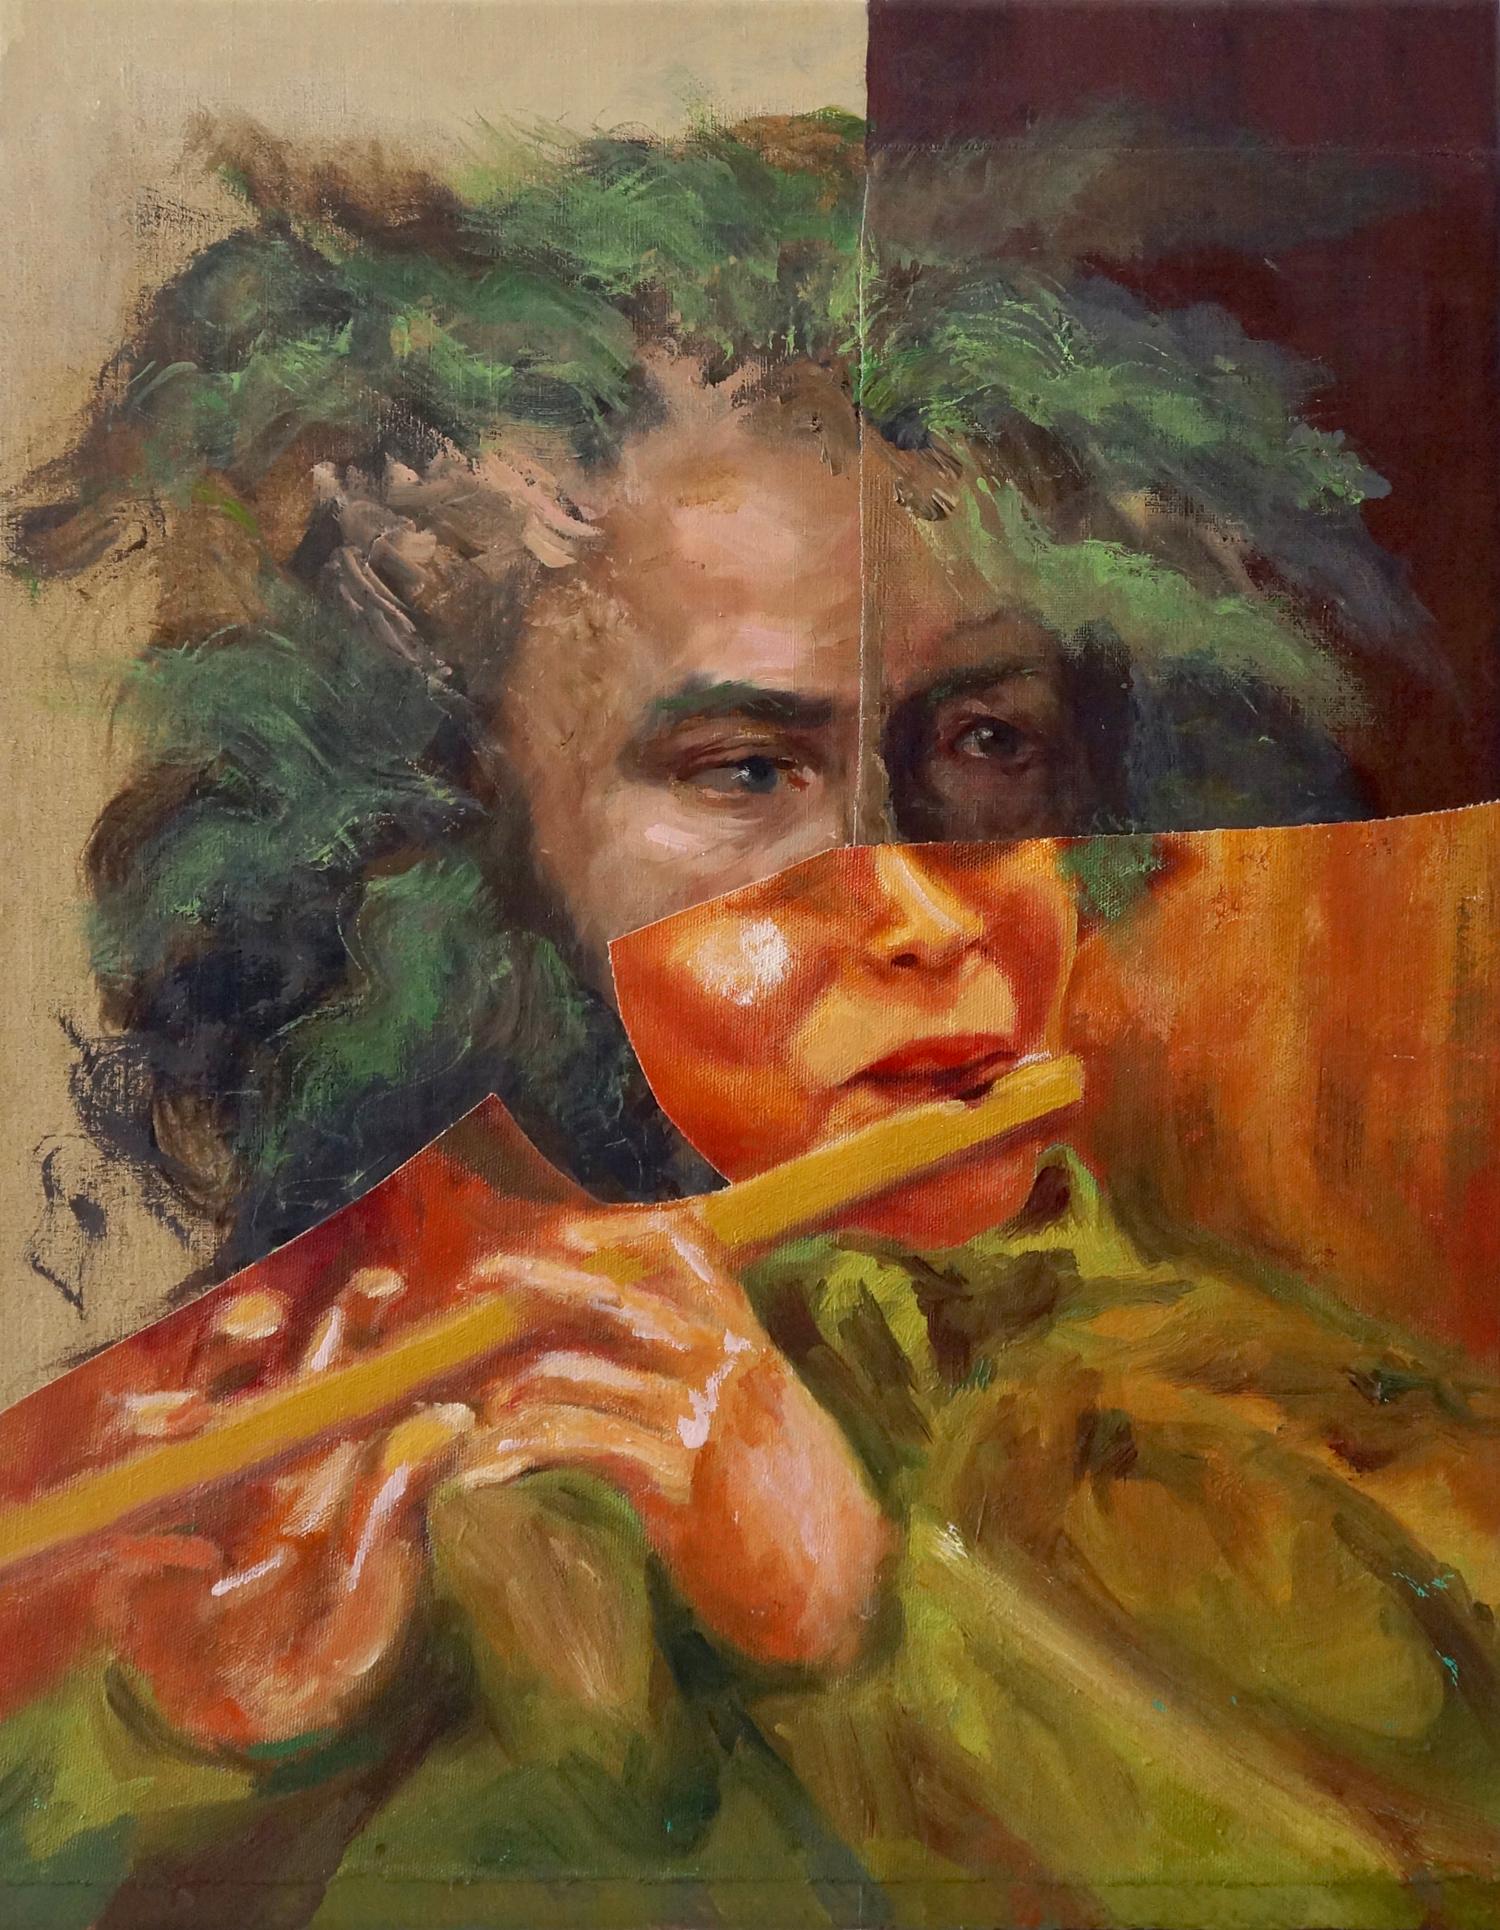 "Flute Player", contemporary, portrait, orange, green, collage, acrylic painting